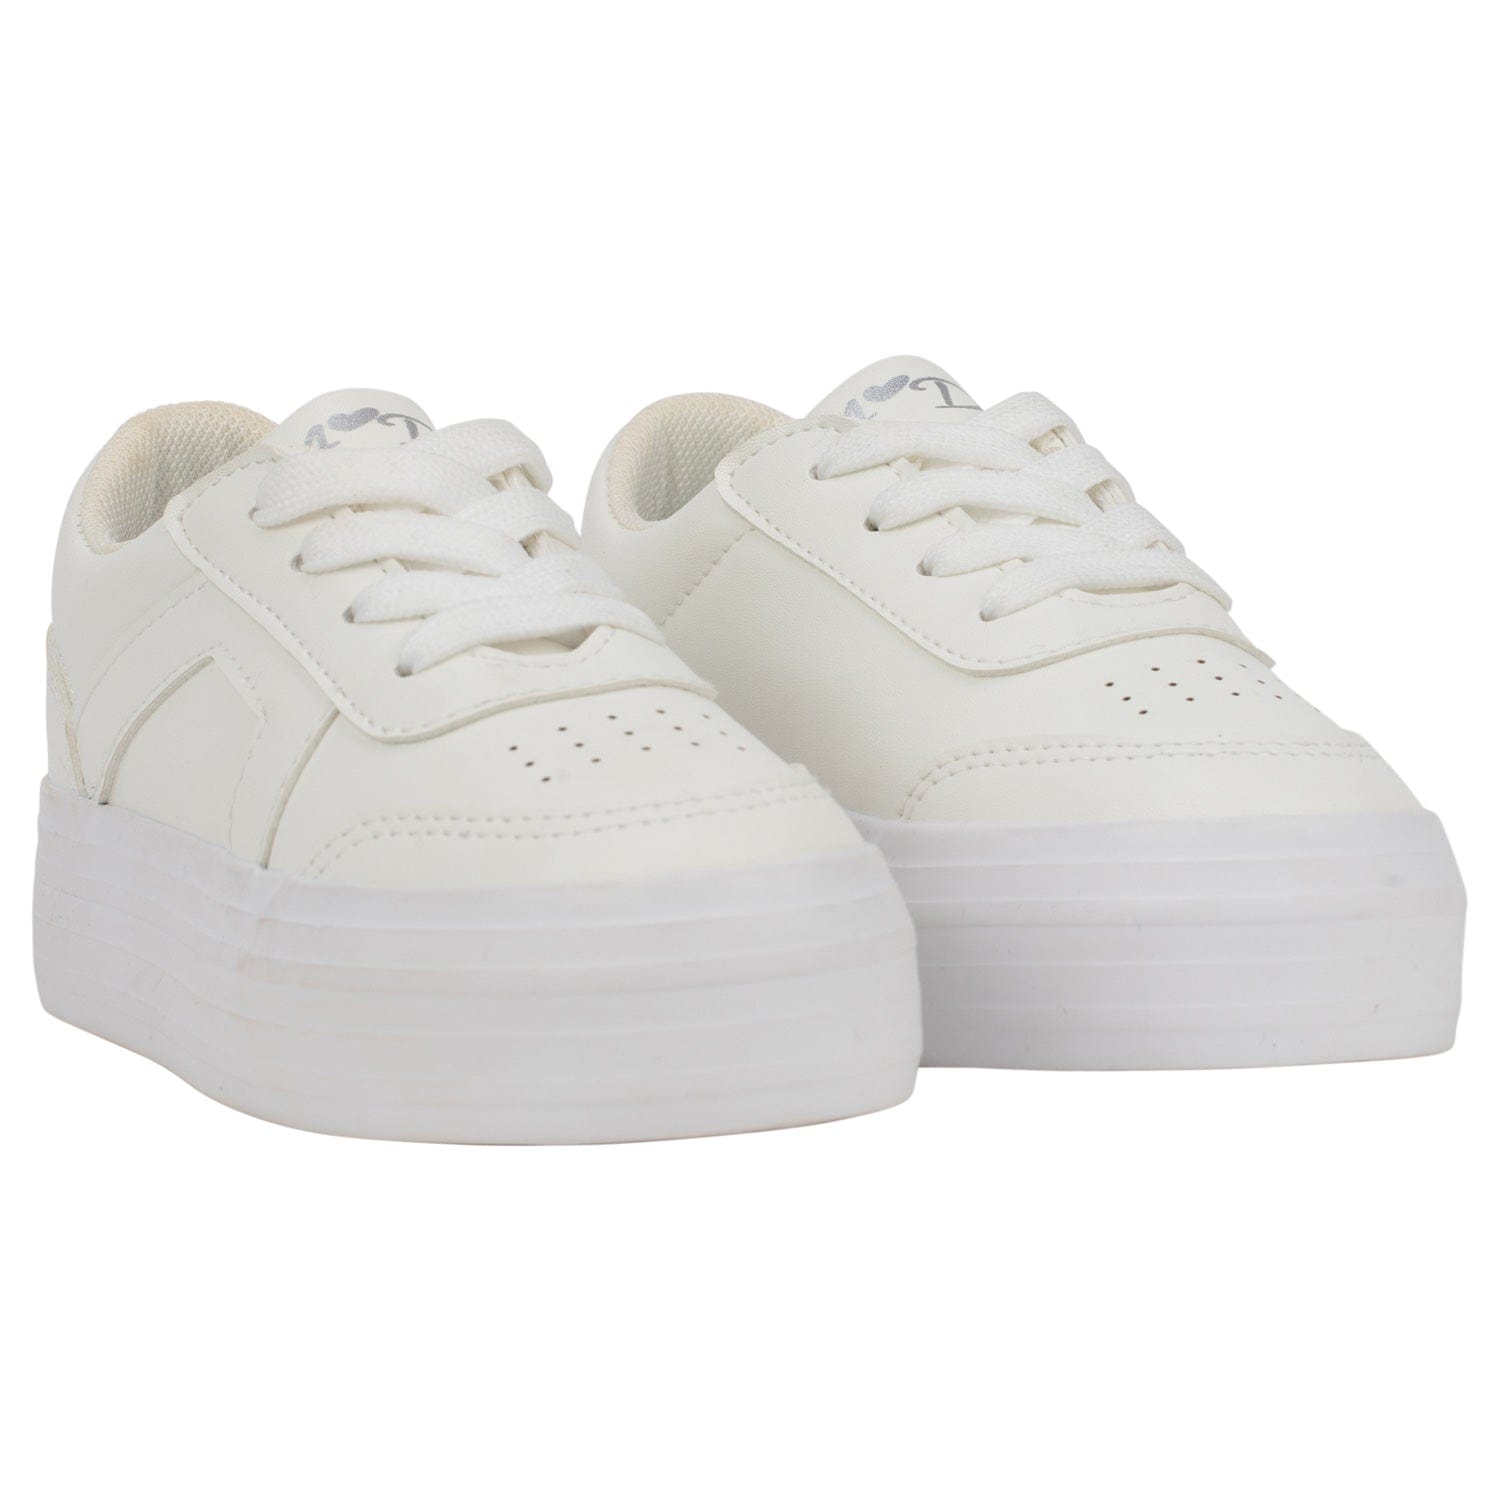 A-Dee Shoes 26 S245101-1001 Adee Girls Patty Bright White Platform Trainer